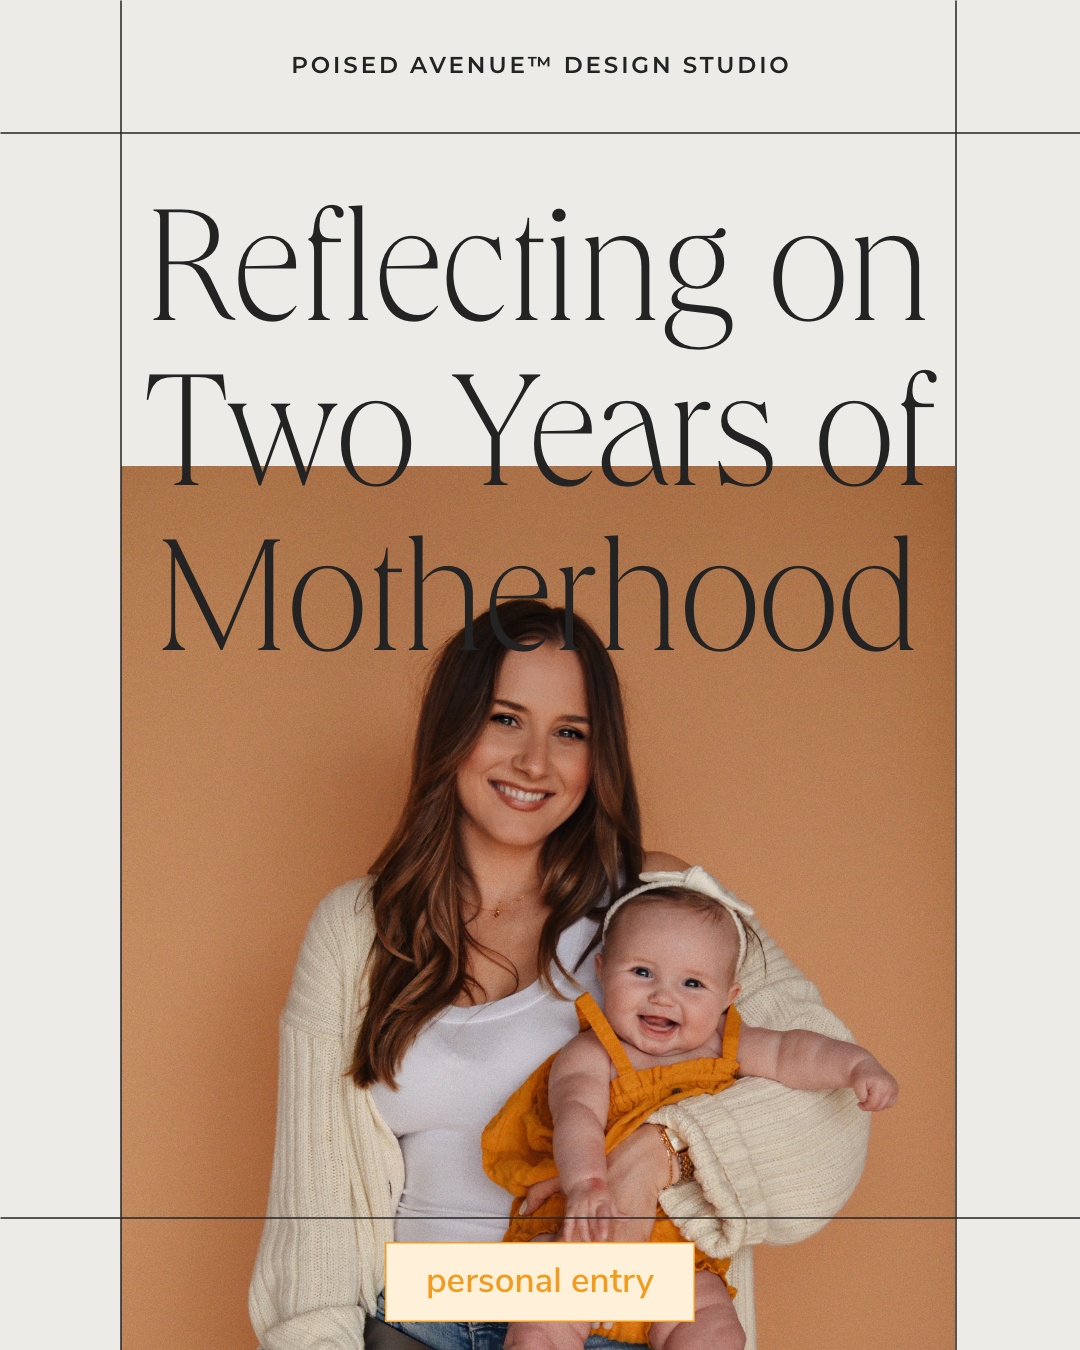 A reflection on my second year of motherhood, by Amanda DeWoody of Poised Avenue Design Studio